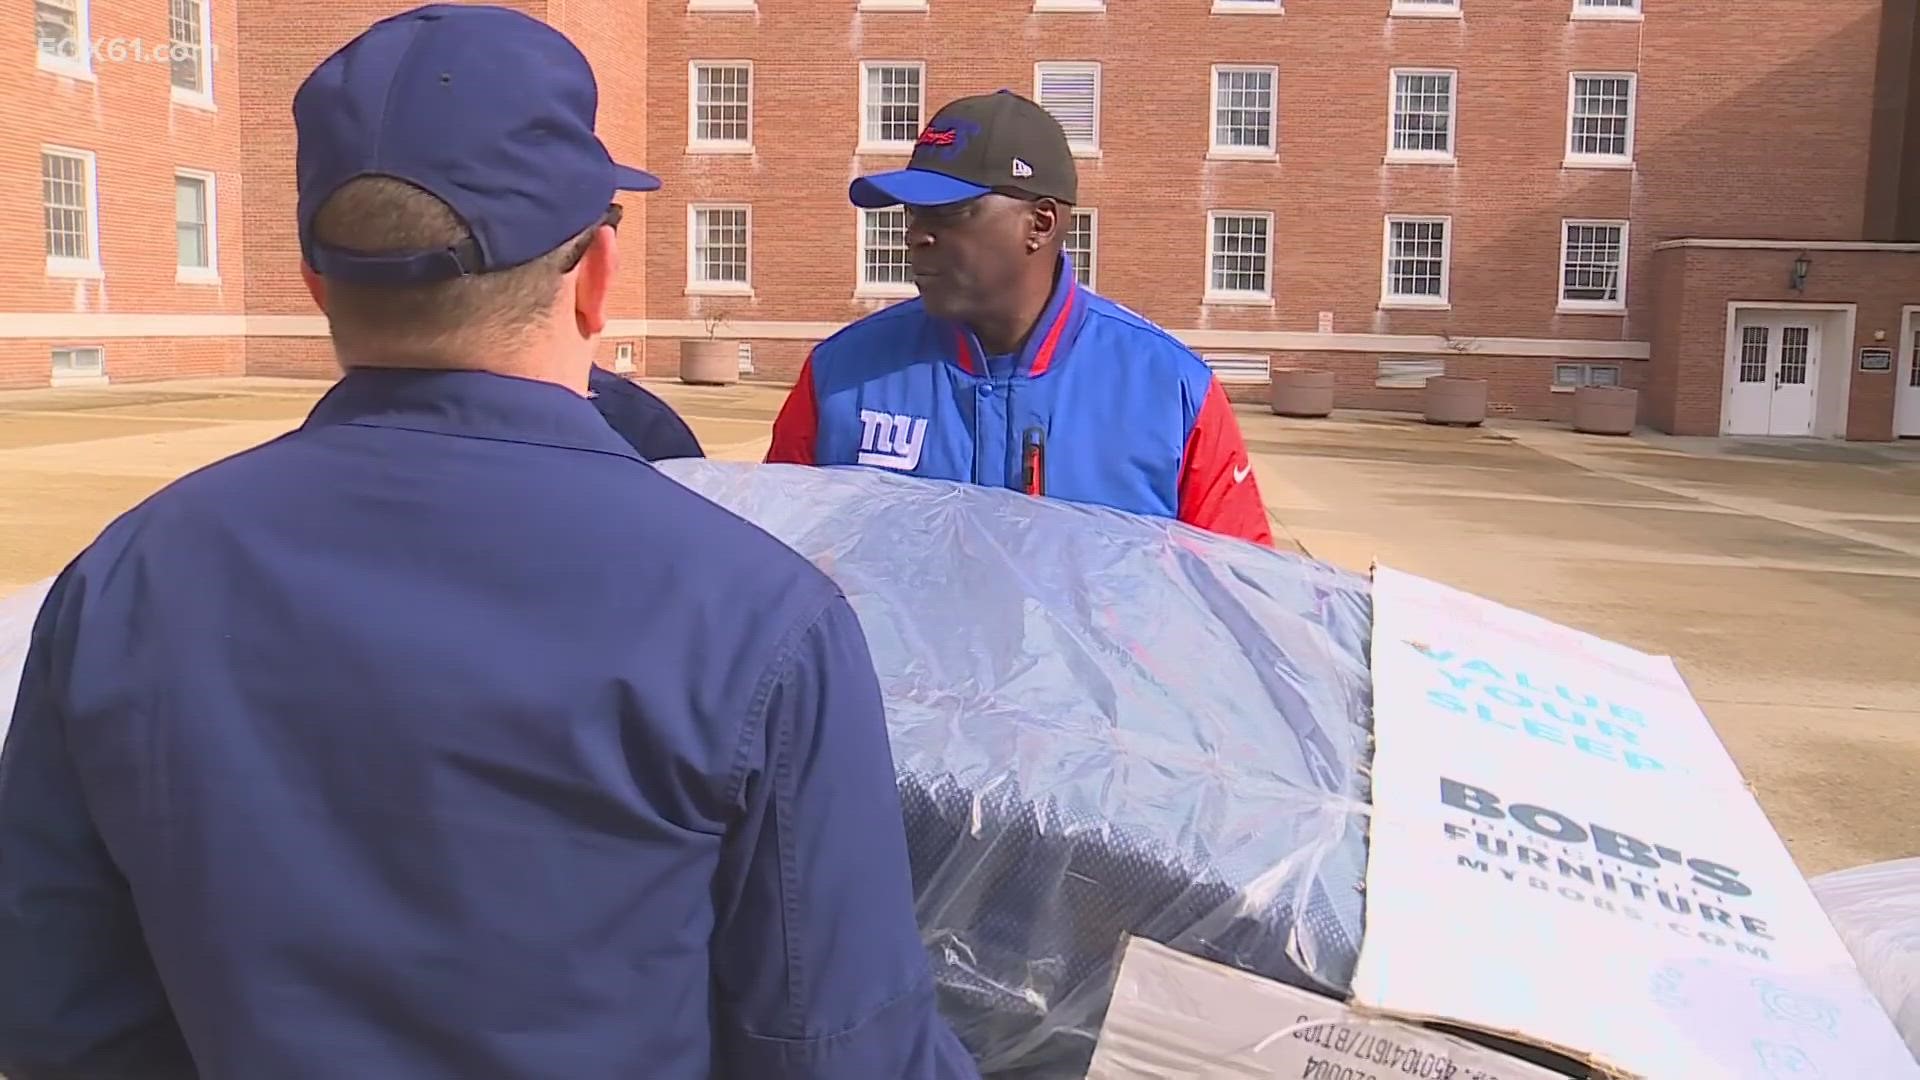 The Giants Ottis “OJ” Anderson, who won two Super Bowls as a running back for the team helped give them out in New London.